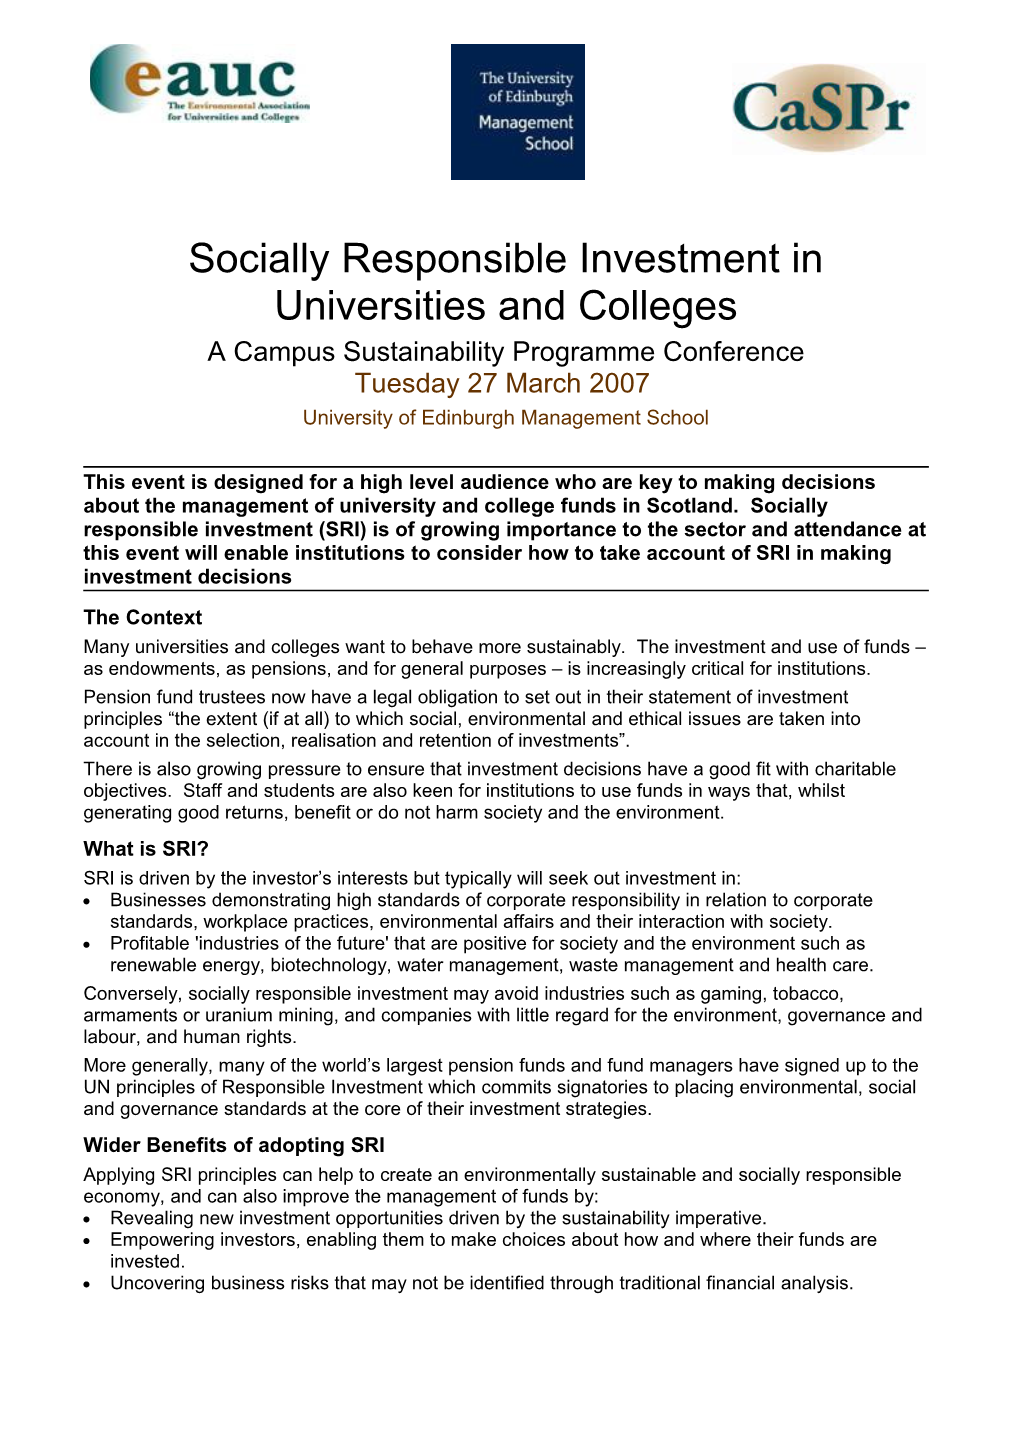 Socially Responsible Investment in Universities and Colleges